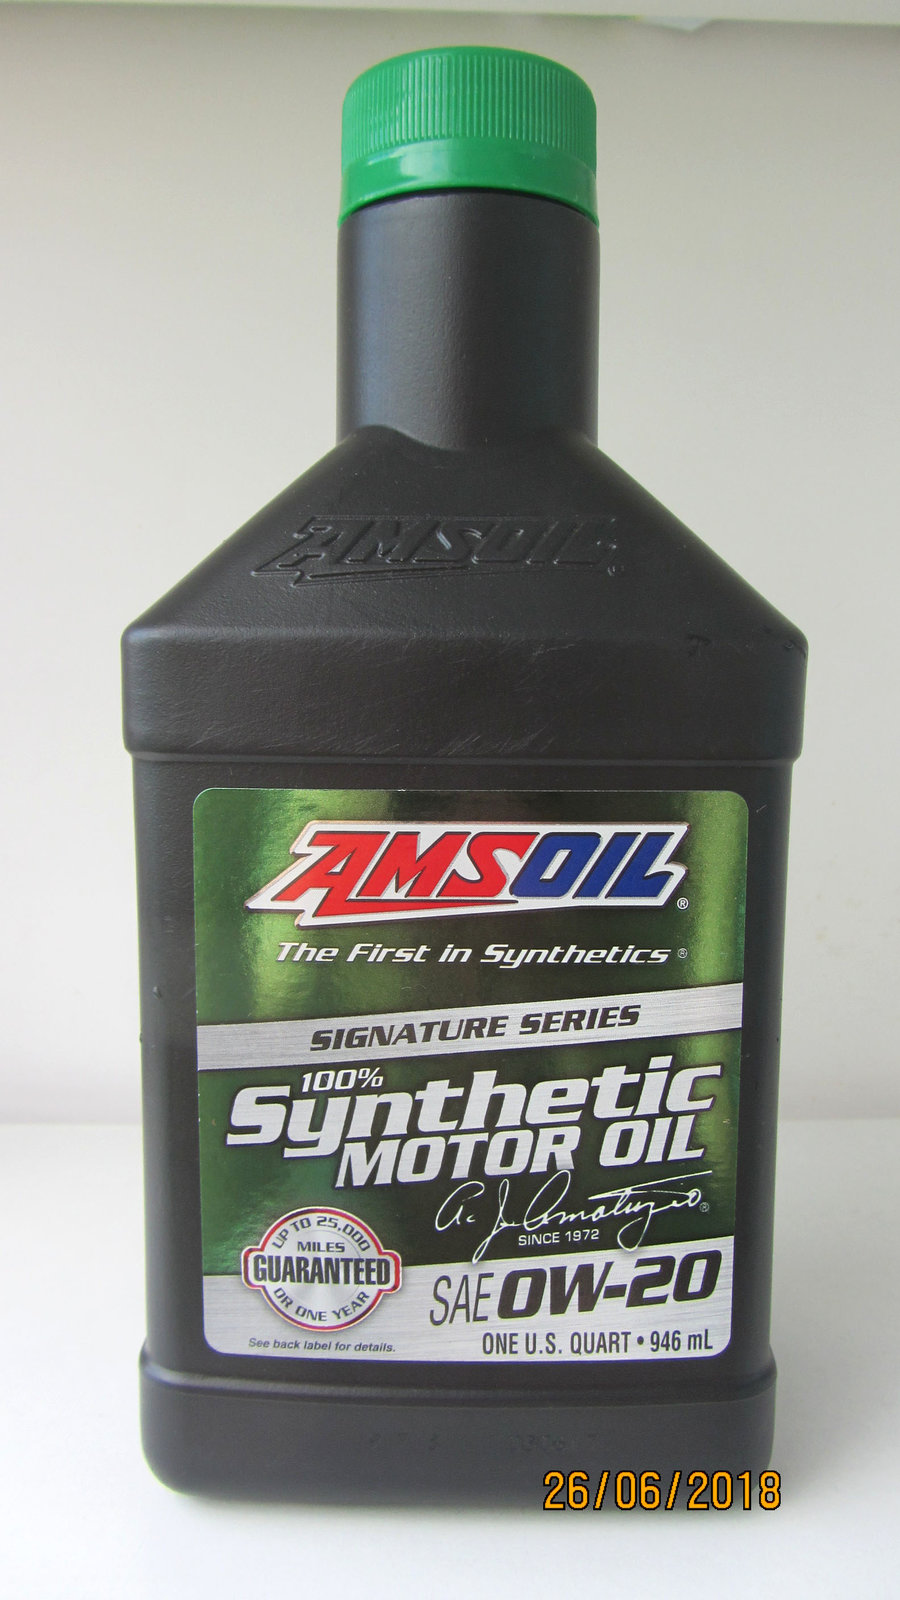 Signature series synthetic. AMSOIL 0w20. 0w-20 AMSOIL SS. АМСОИЛ сигнатуре Сериес 0w20. AMSOIL 0w16.